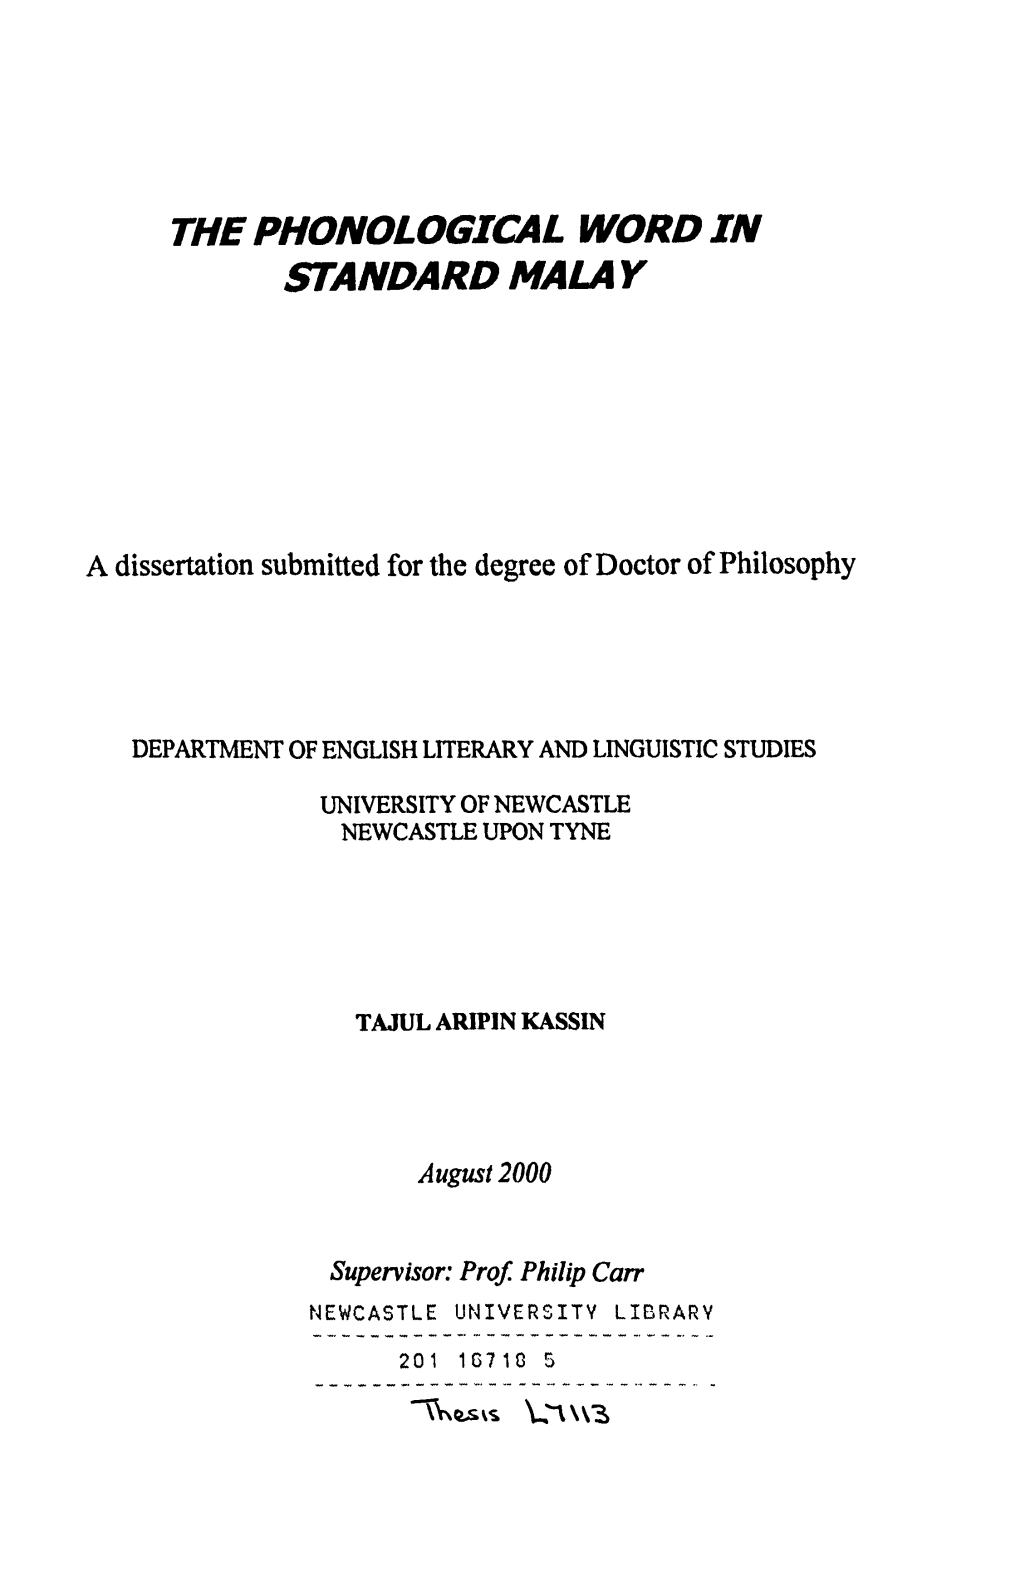 A Dissertation Submitted for the Degree of Doctor of Philosophy